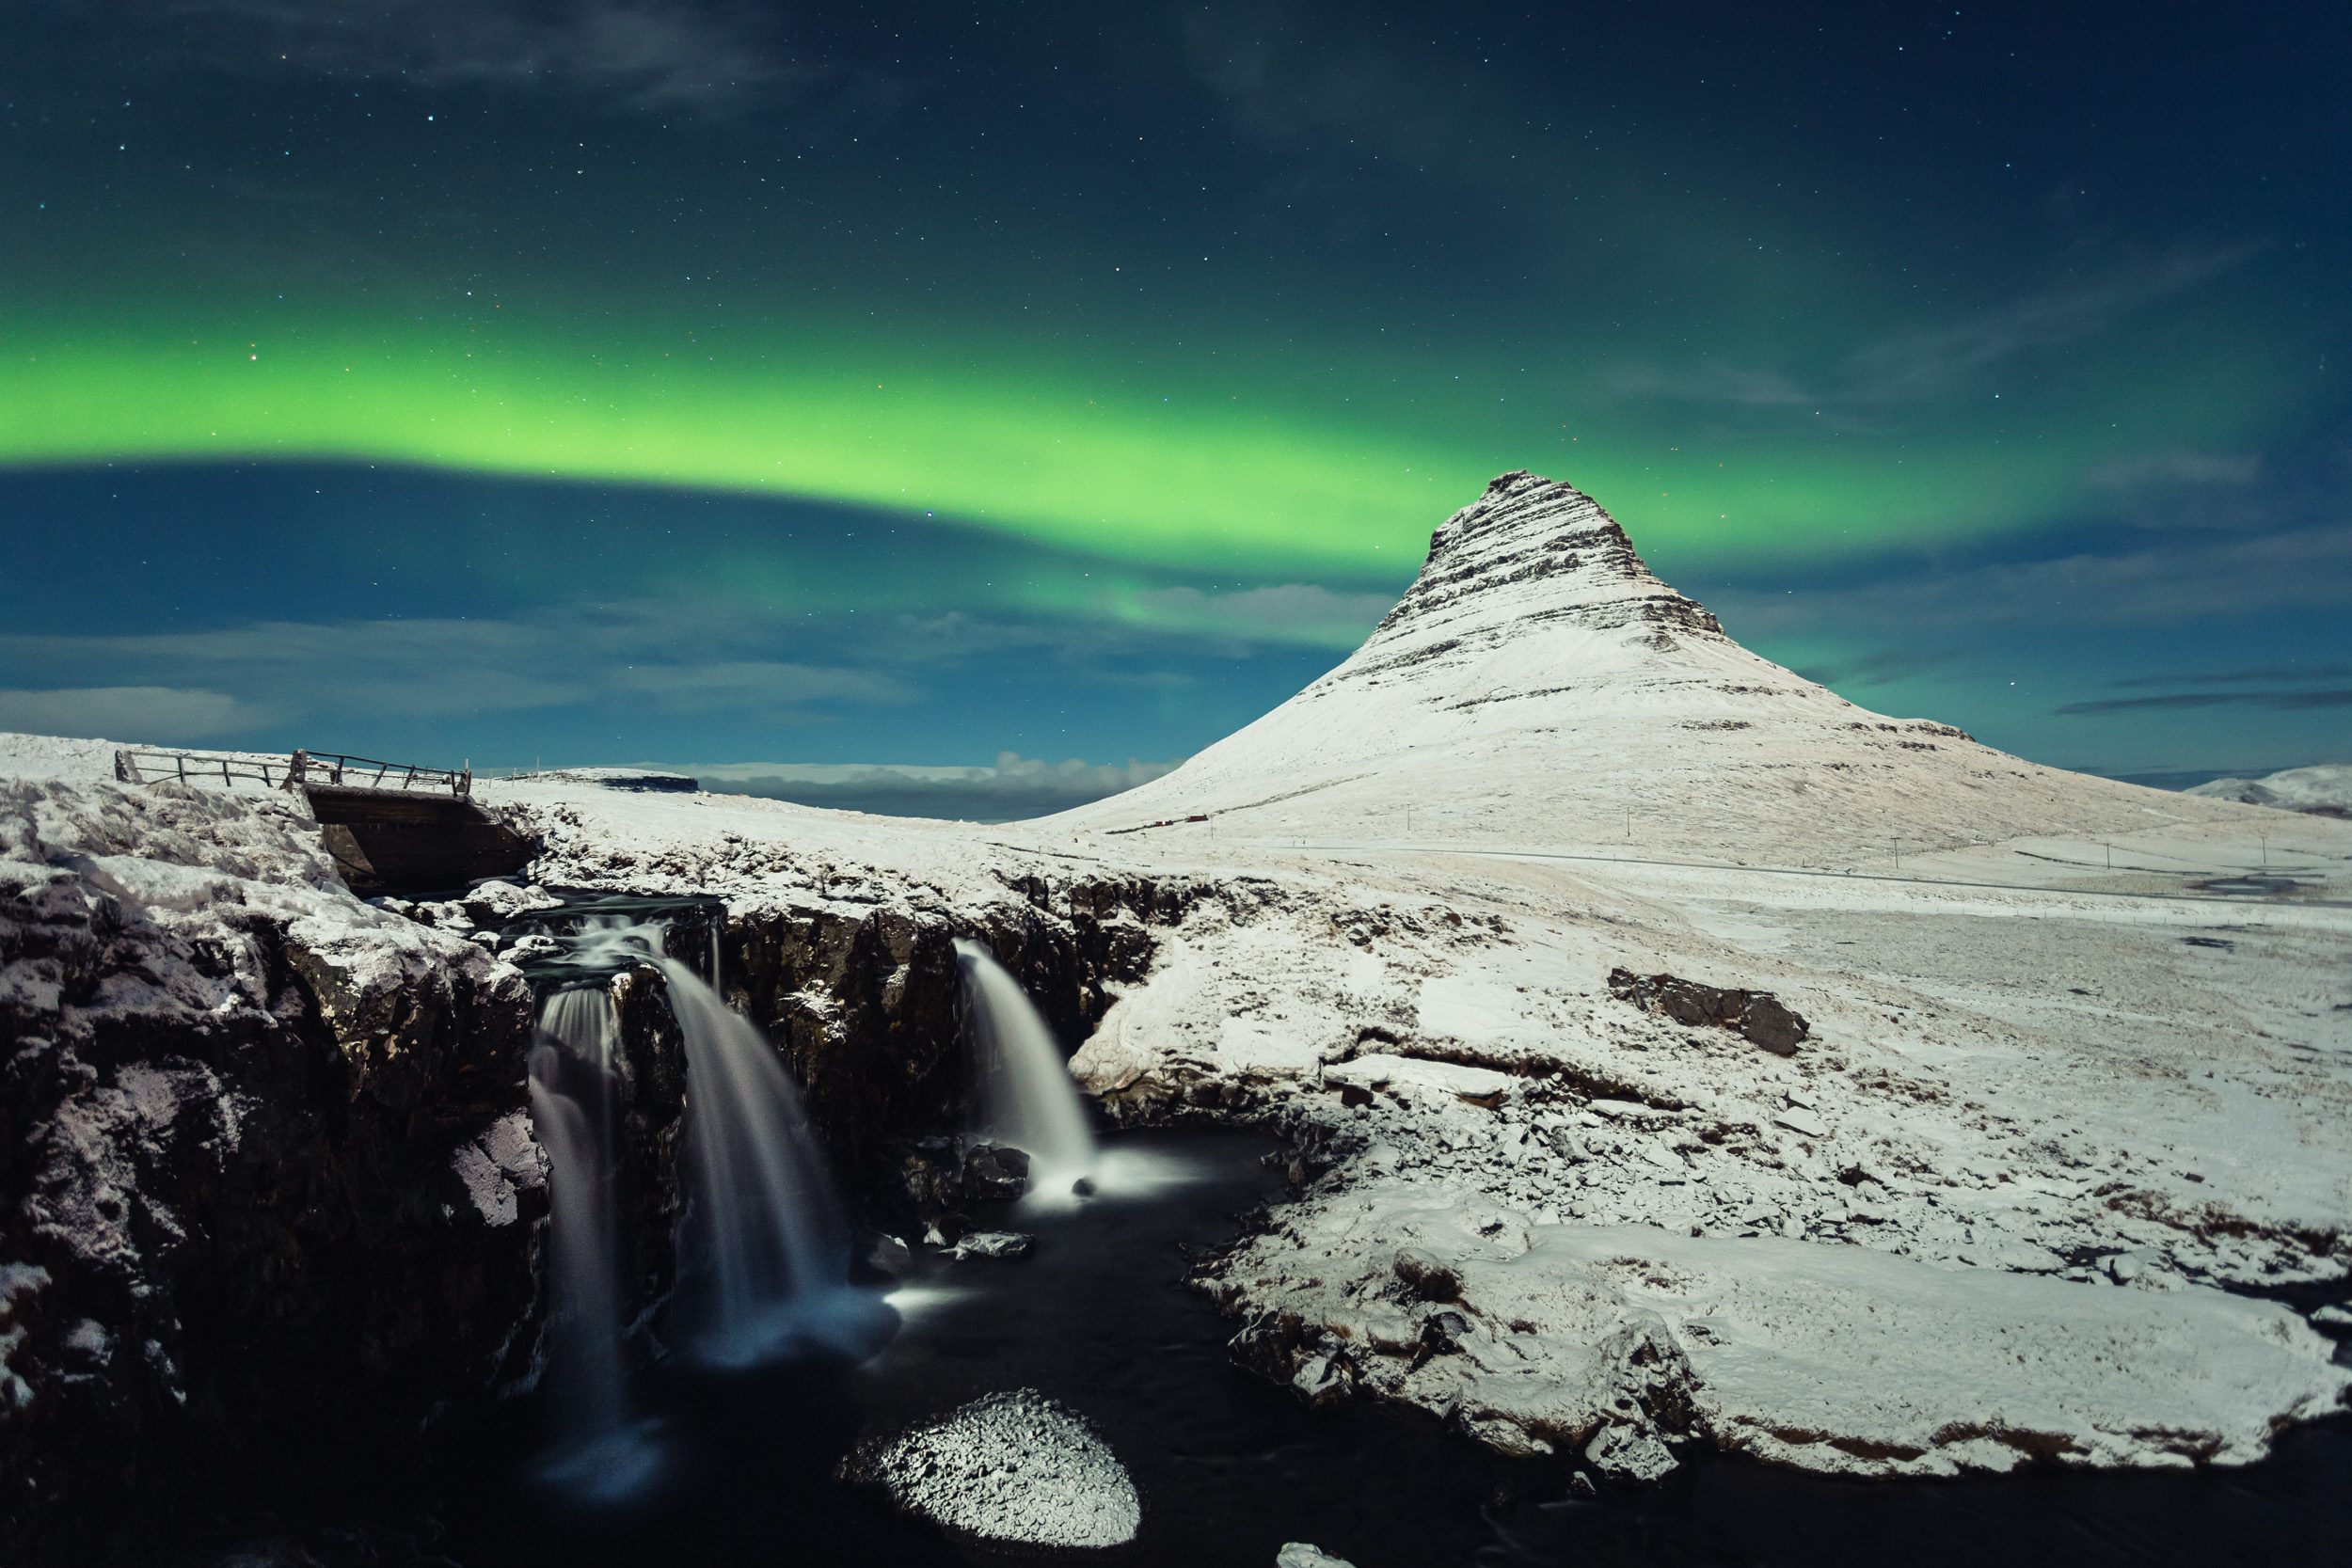 The Aurora Borealis dancing above Kirkjufell mountain in West Iceland.